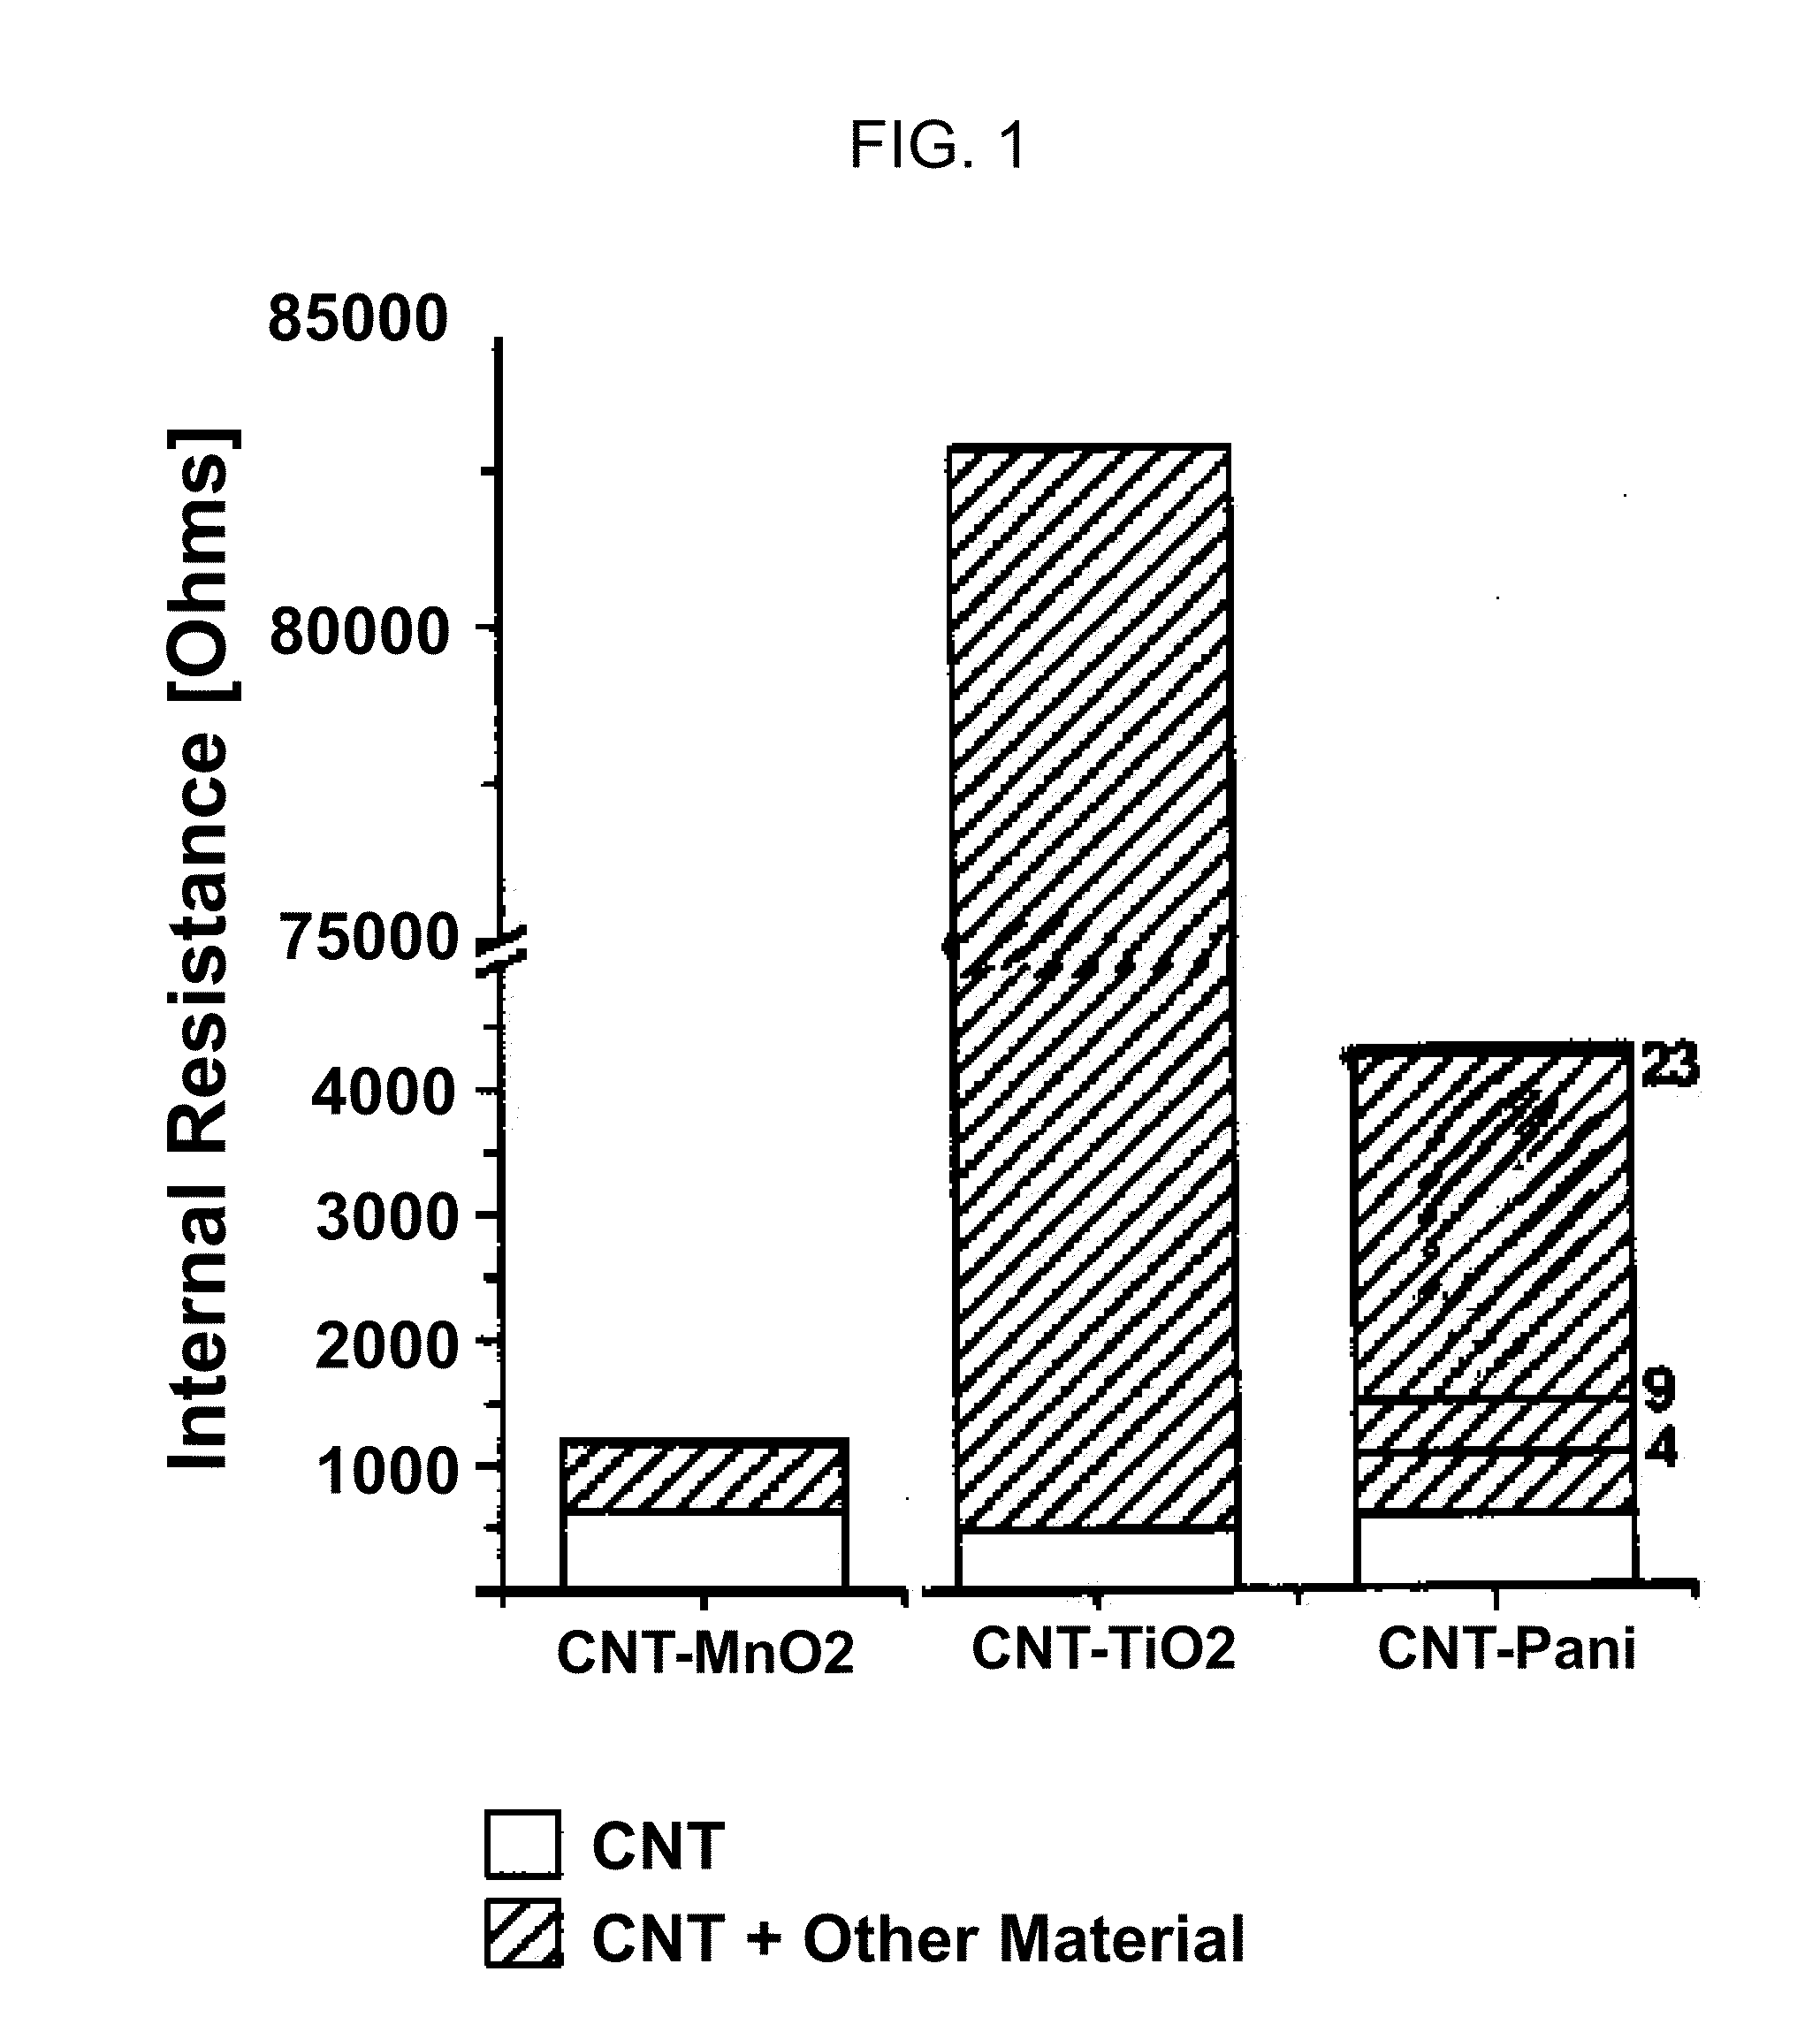 Charge storage device architecture for increasing energy and power density